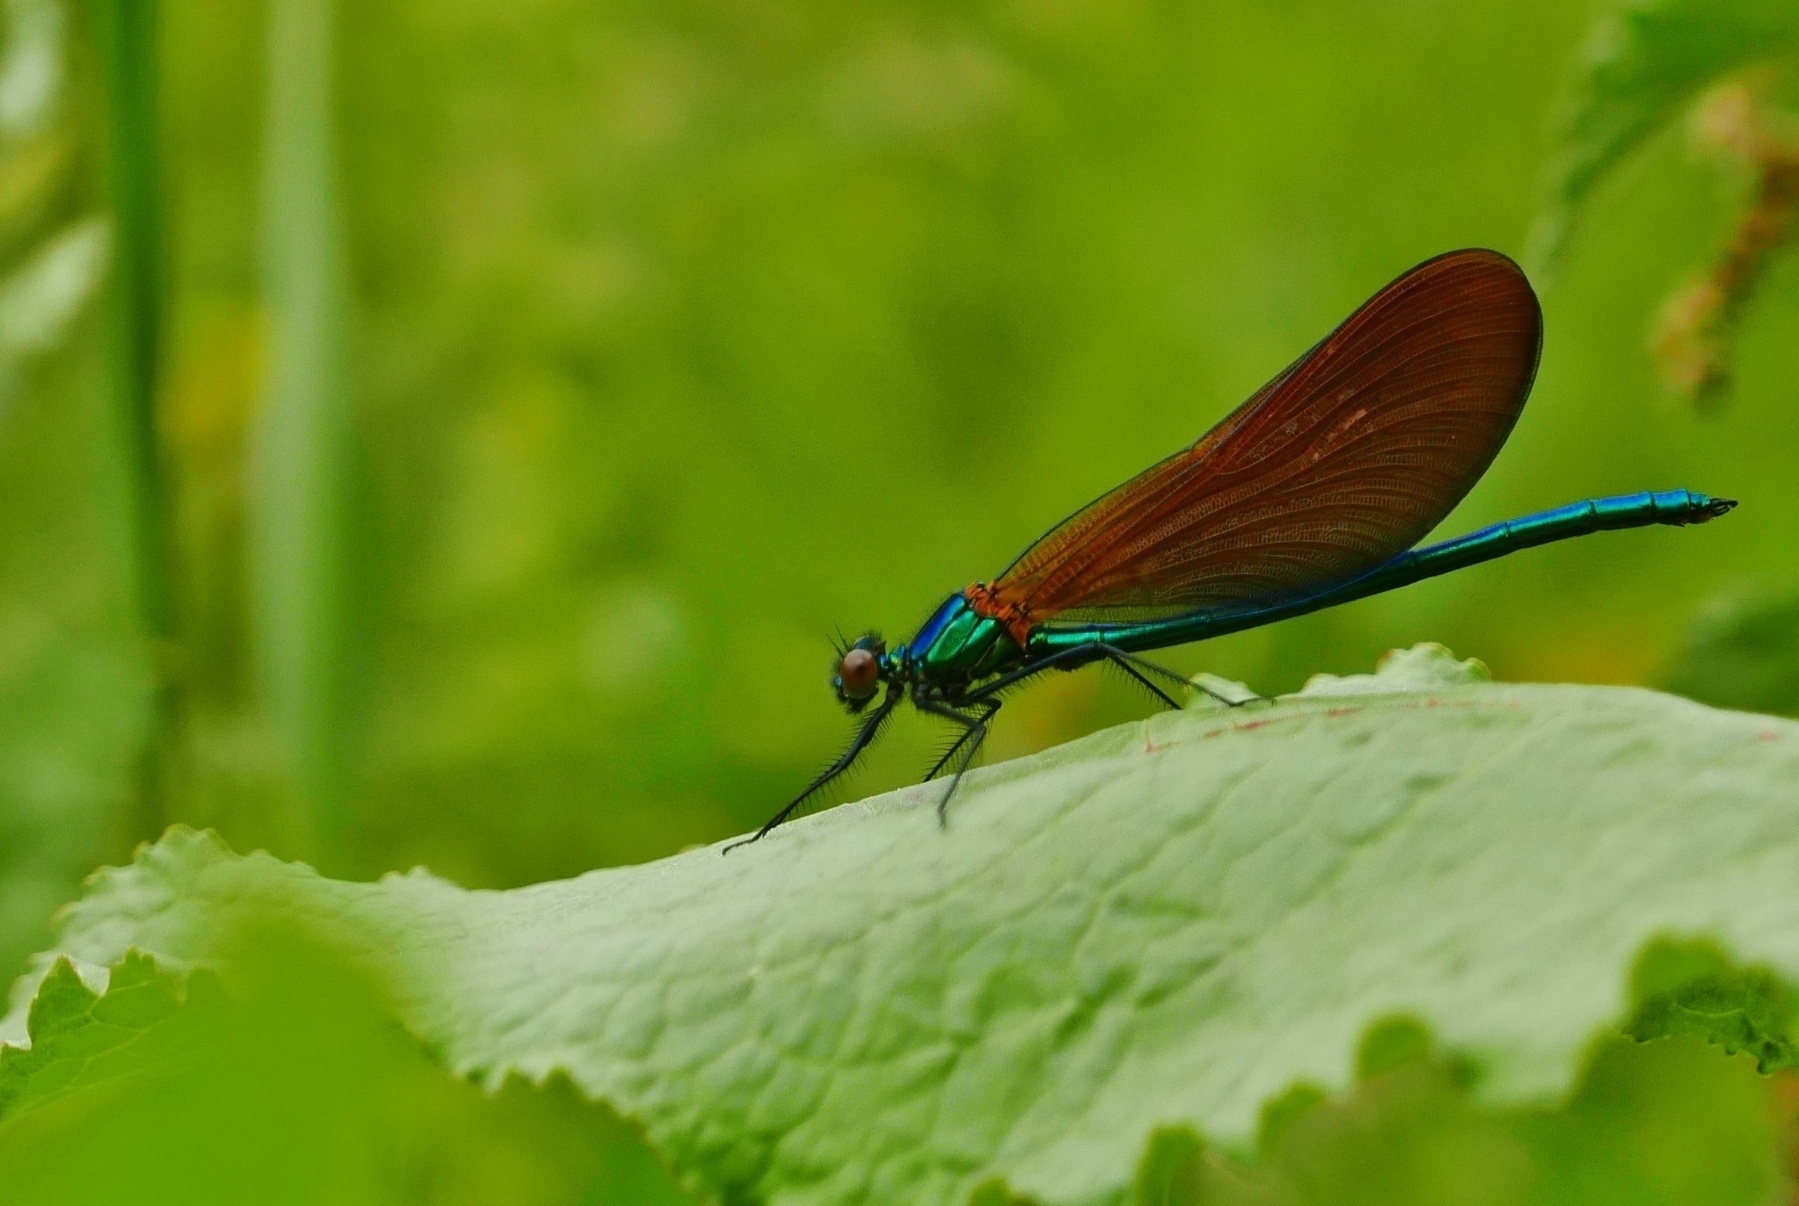 A profile shot of a colourful dragonfly sitting on a green leaf